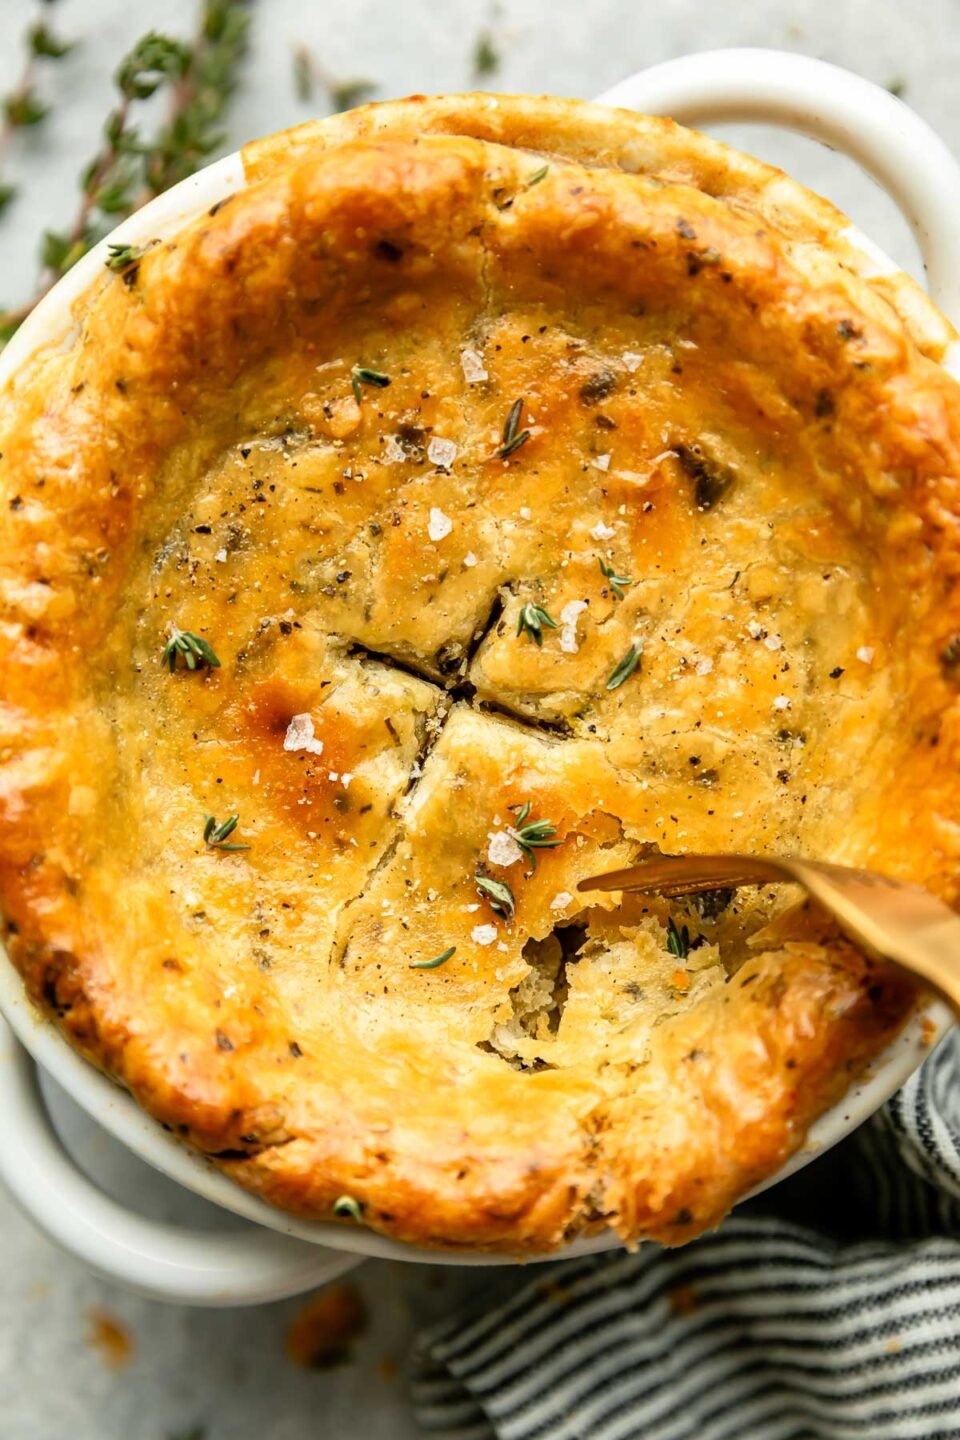 A close-up overhead shot of a fork digging into an individual pot pie on a grey surface alongside a striped cloth and fresh herbs.